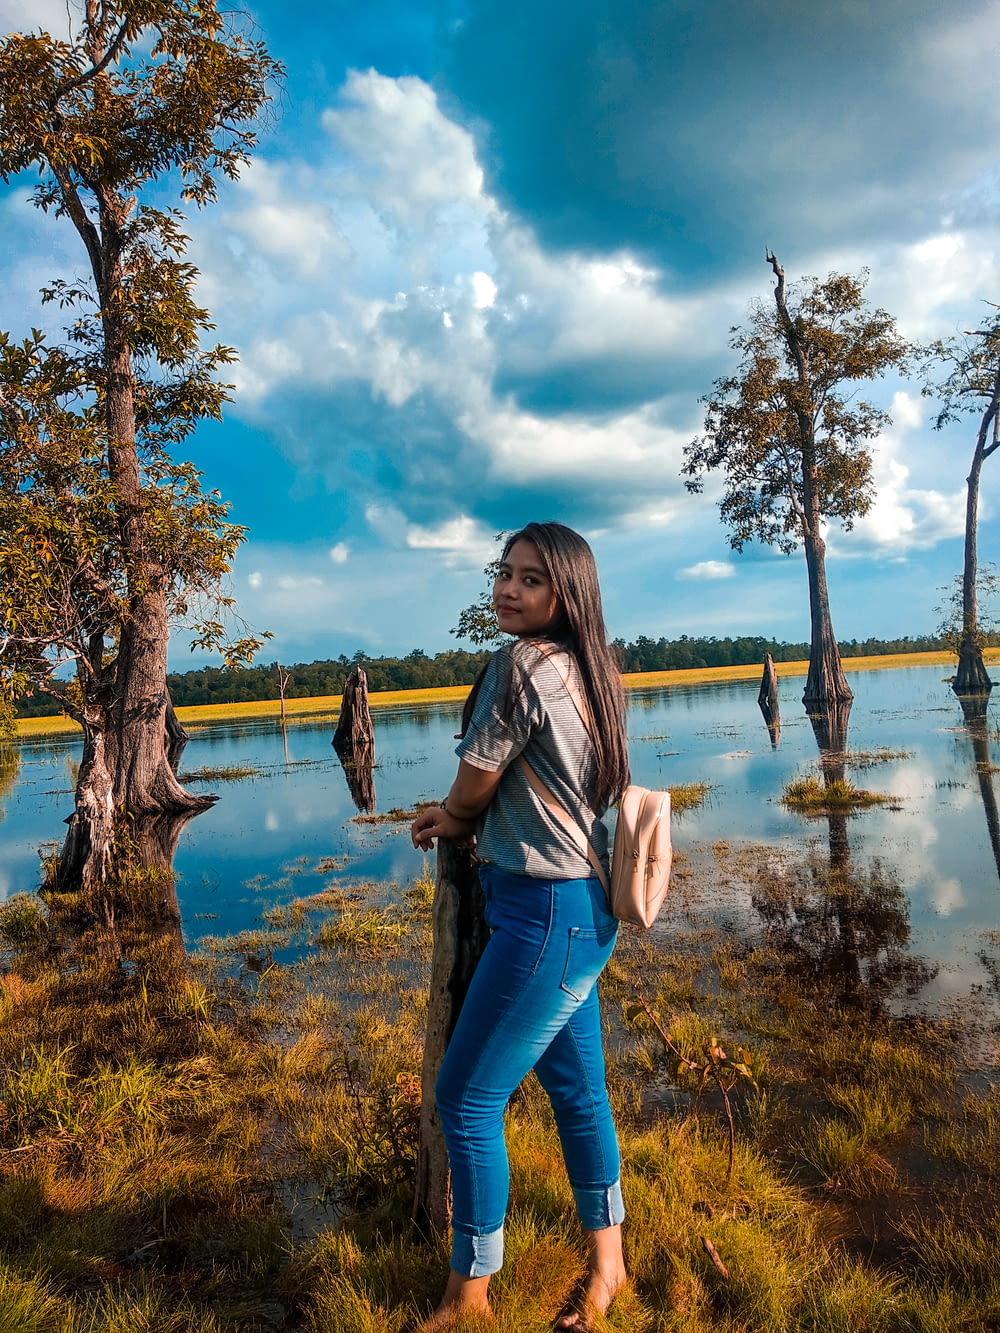 woman in blue denim jeans standing near body of water during daytime